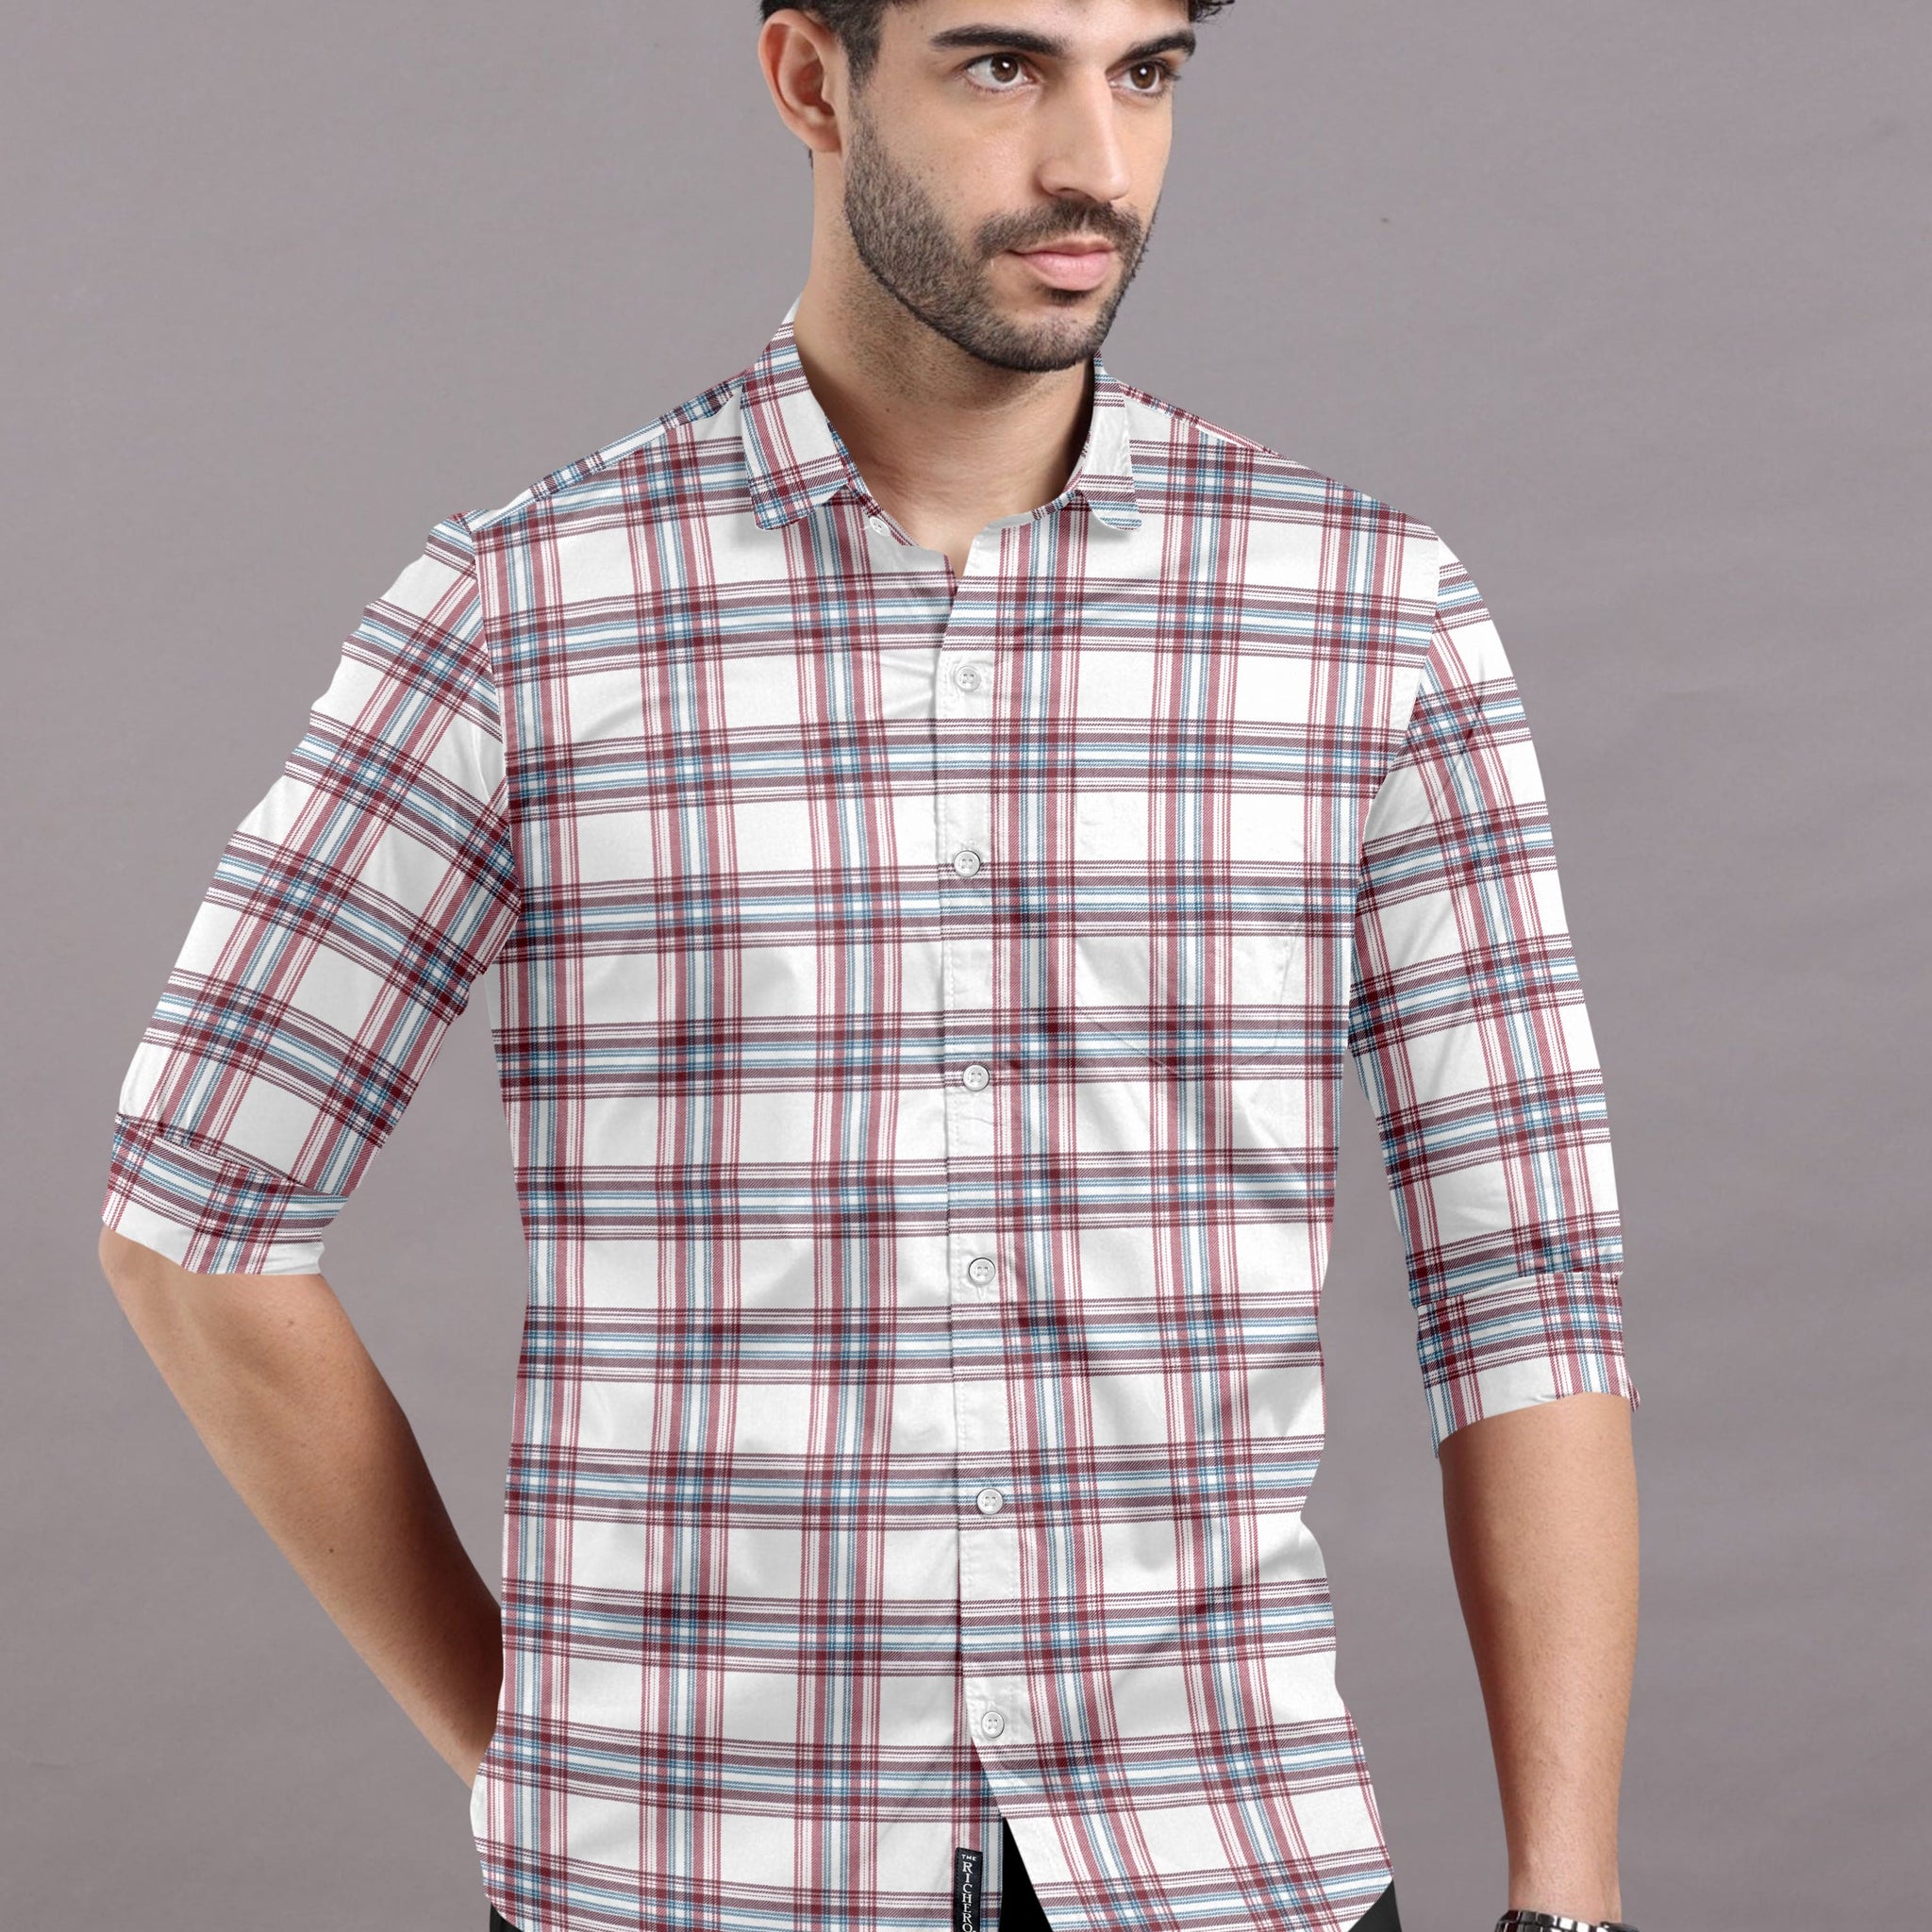 White Shirt with Blue and Maroon Checks